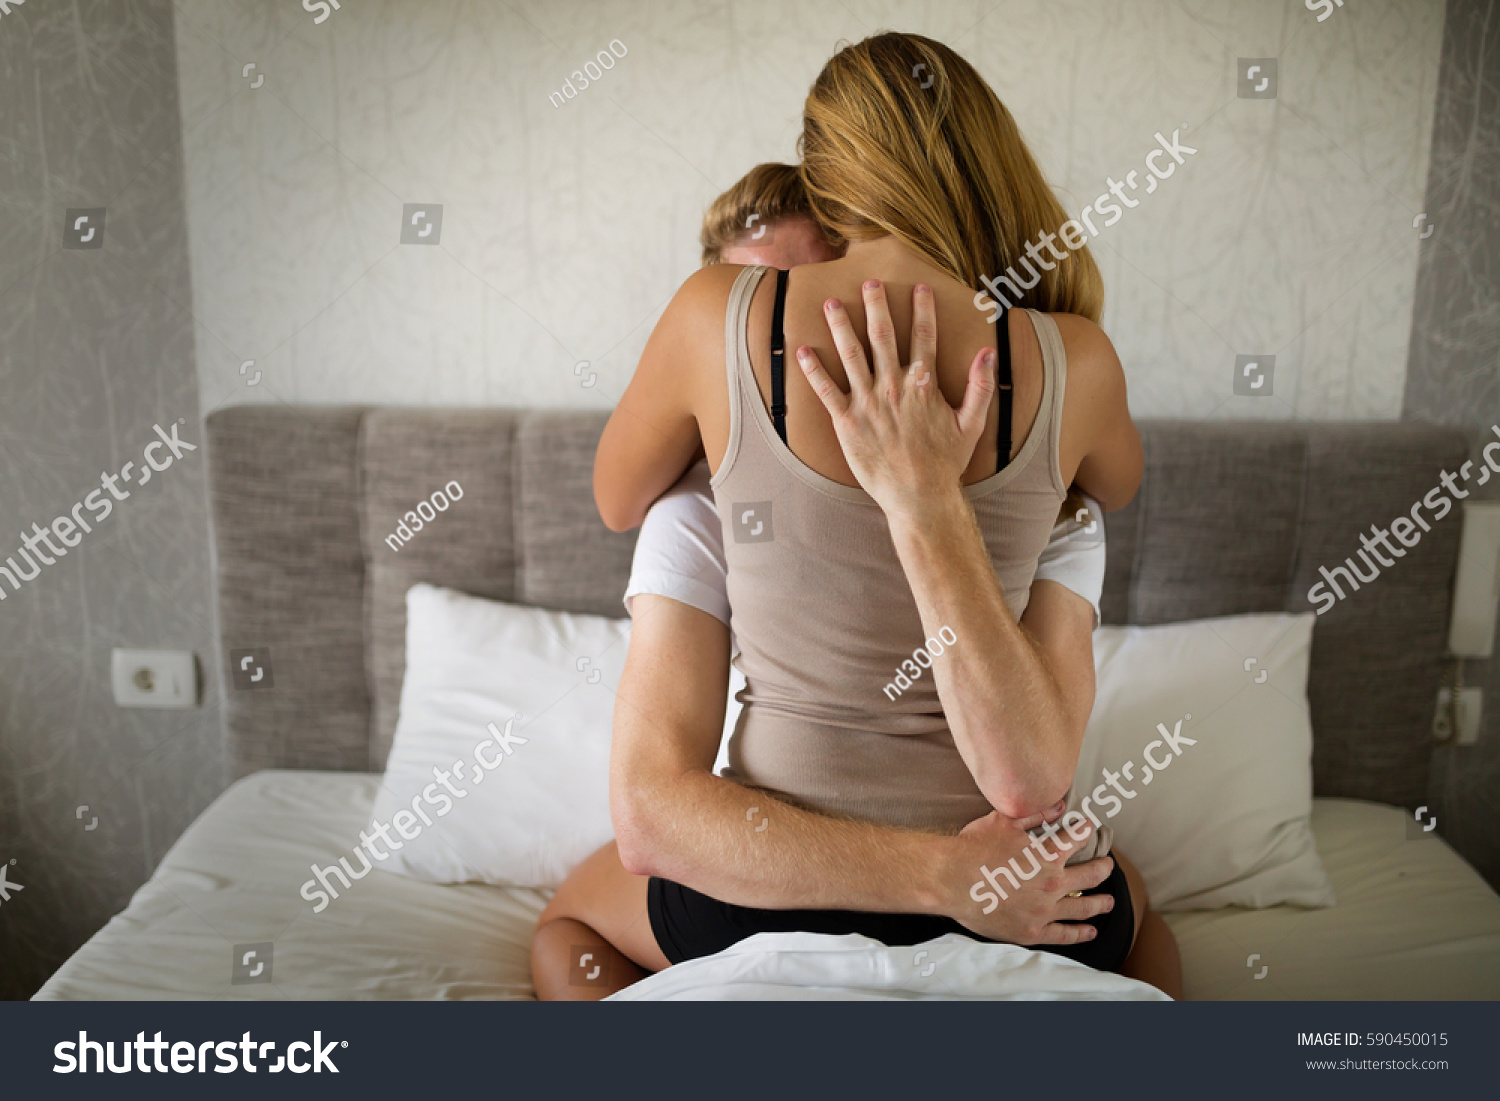 Romantic couple in bed being intimate #590450015